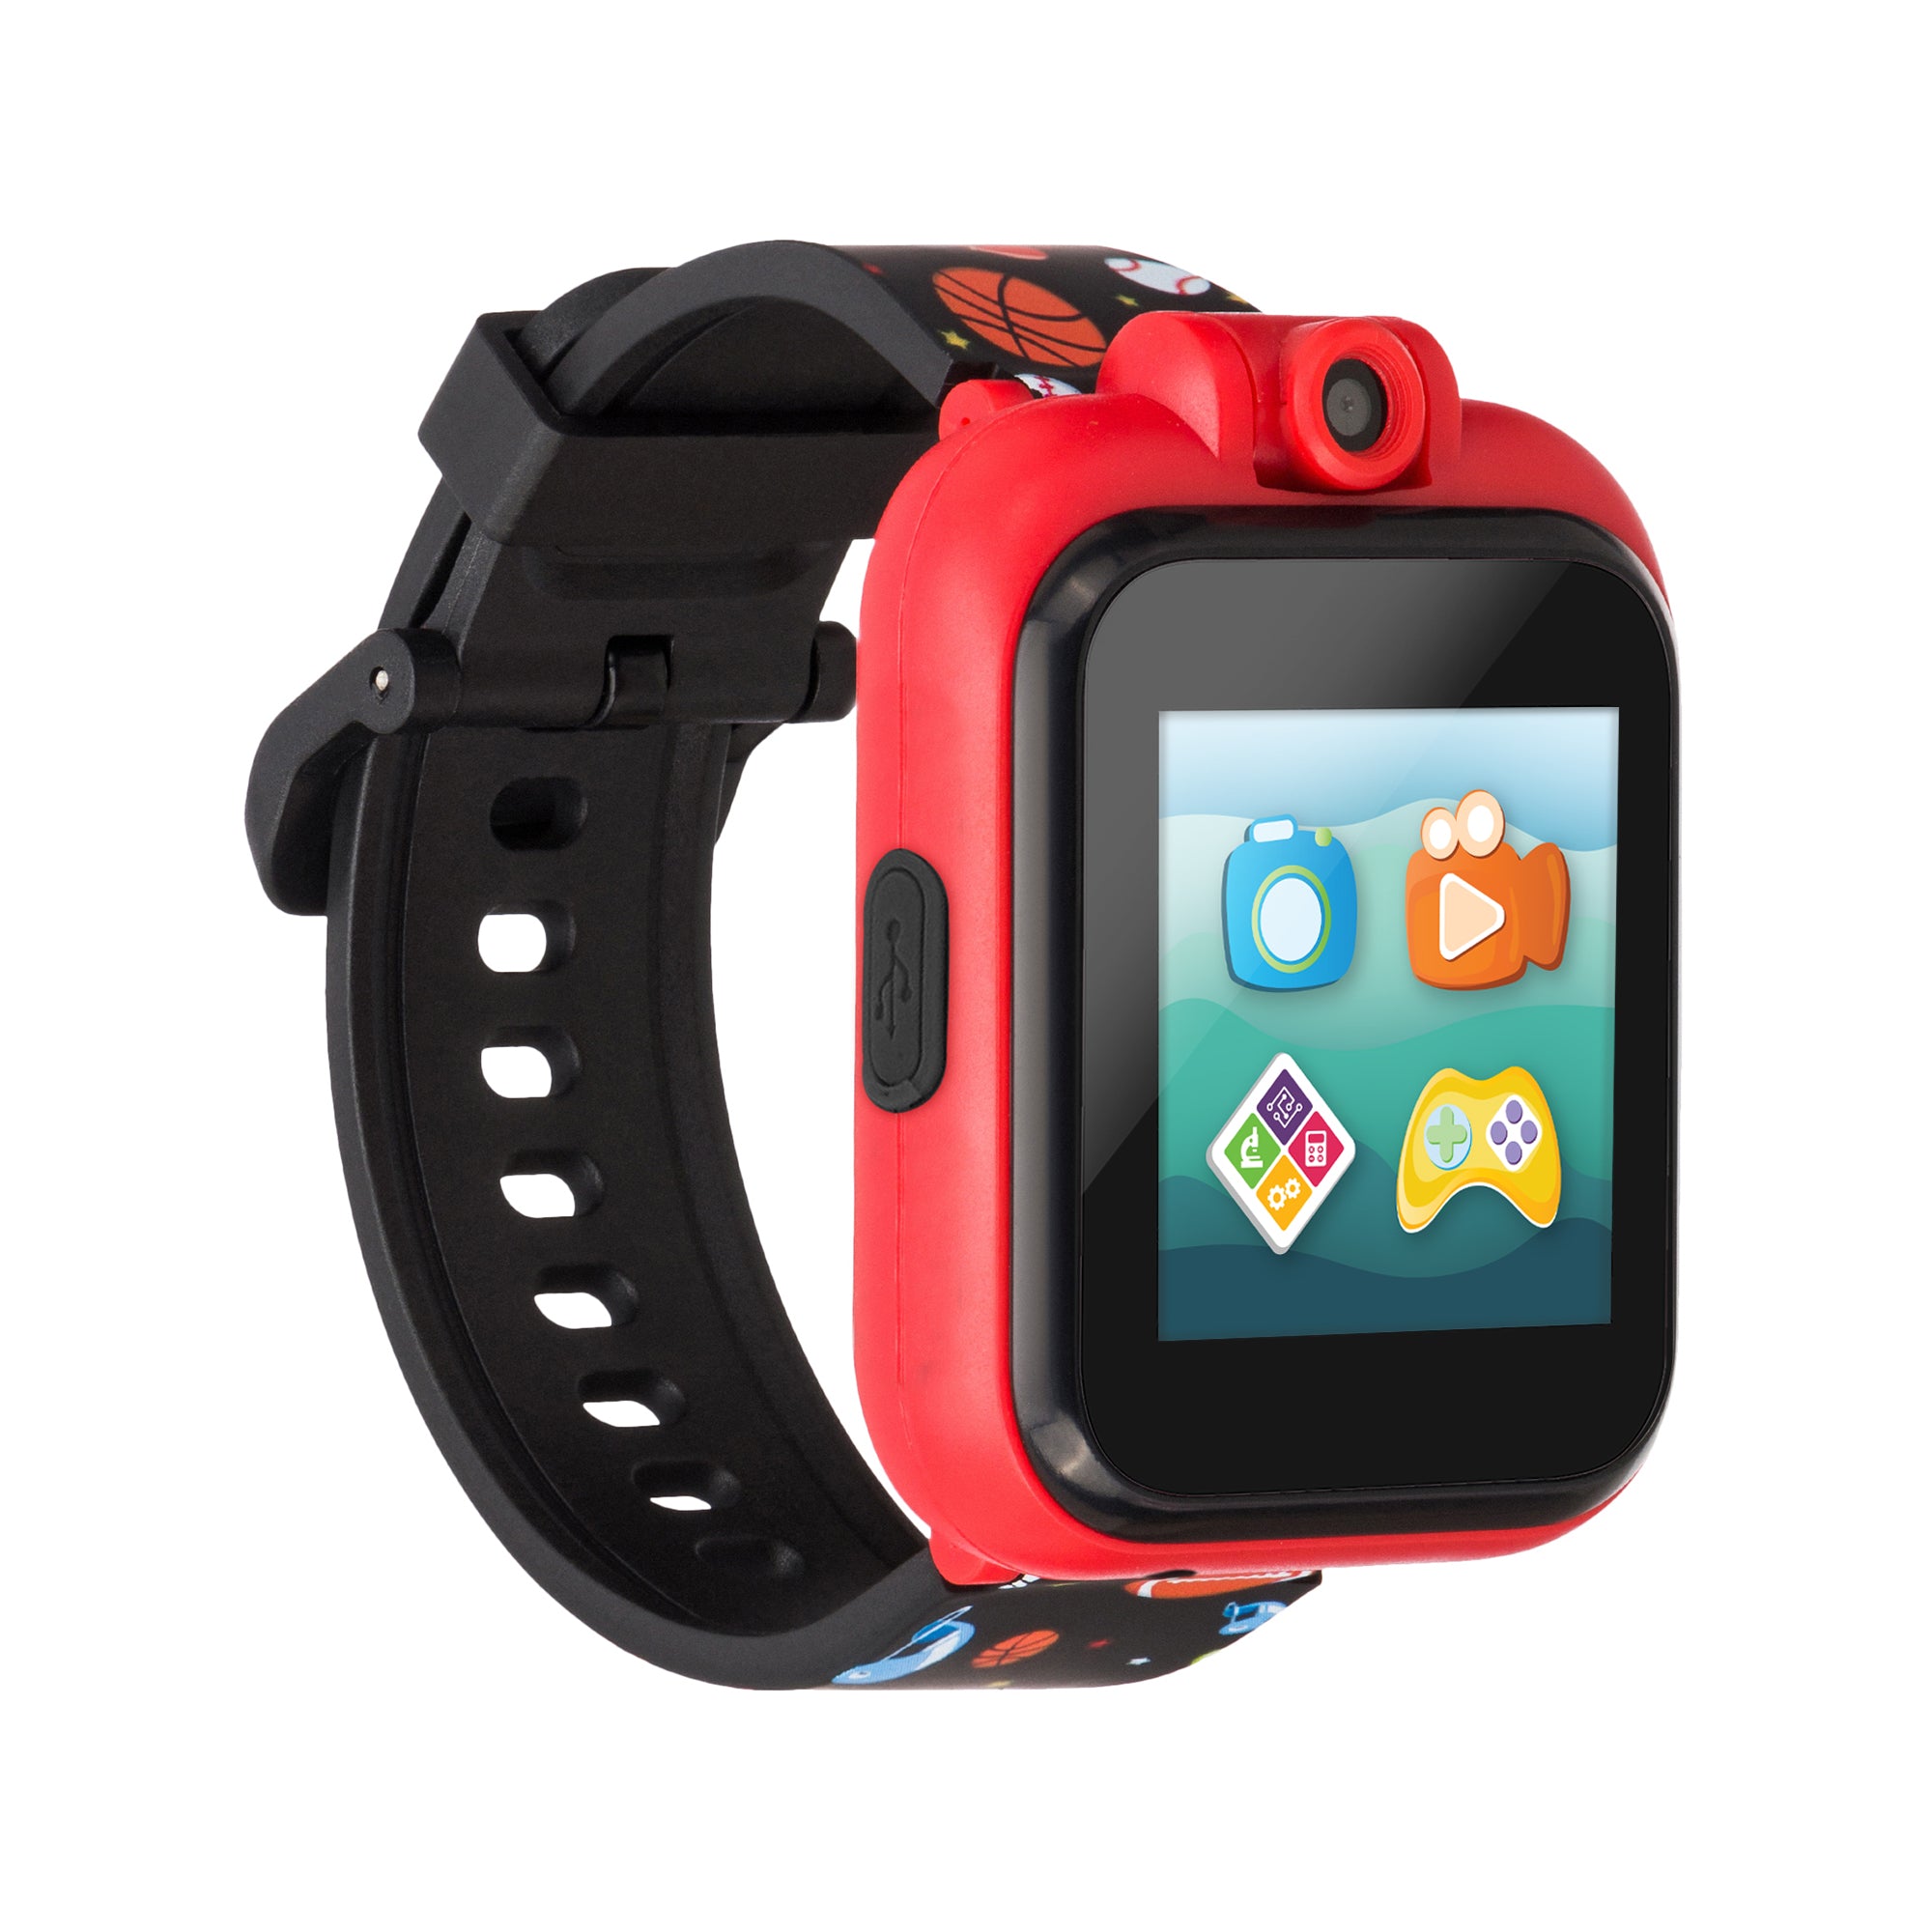 PlayZoom 2 Kids Smartwatch with Headphones: Black Sports Print affordable smart watch with headphones